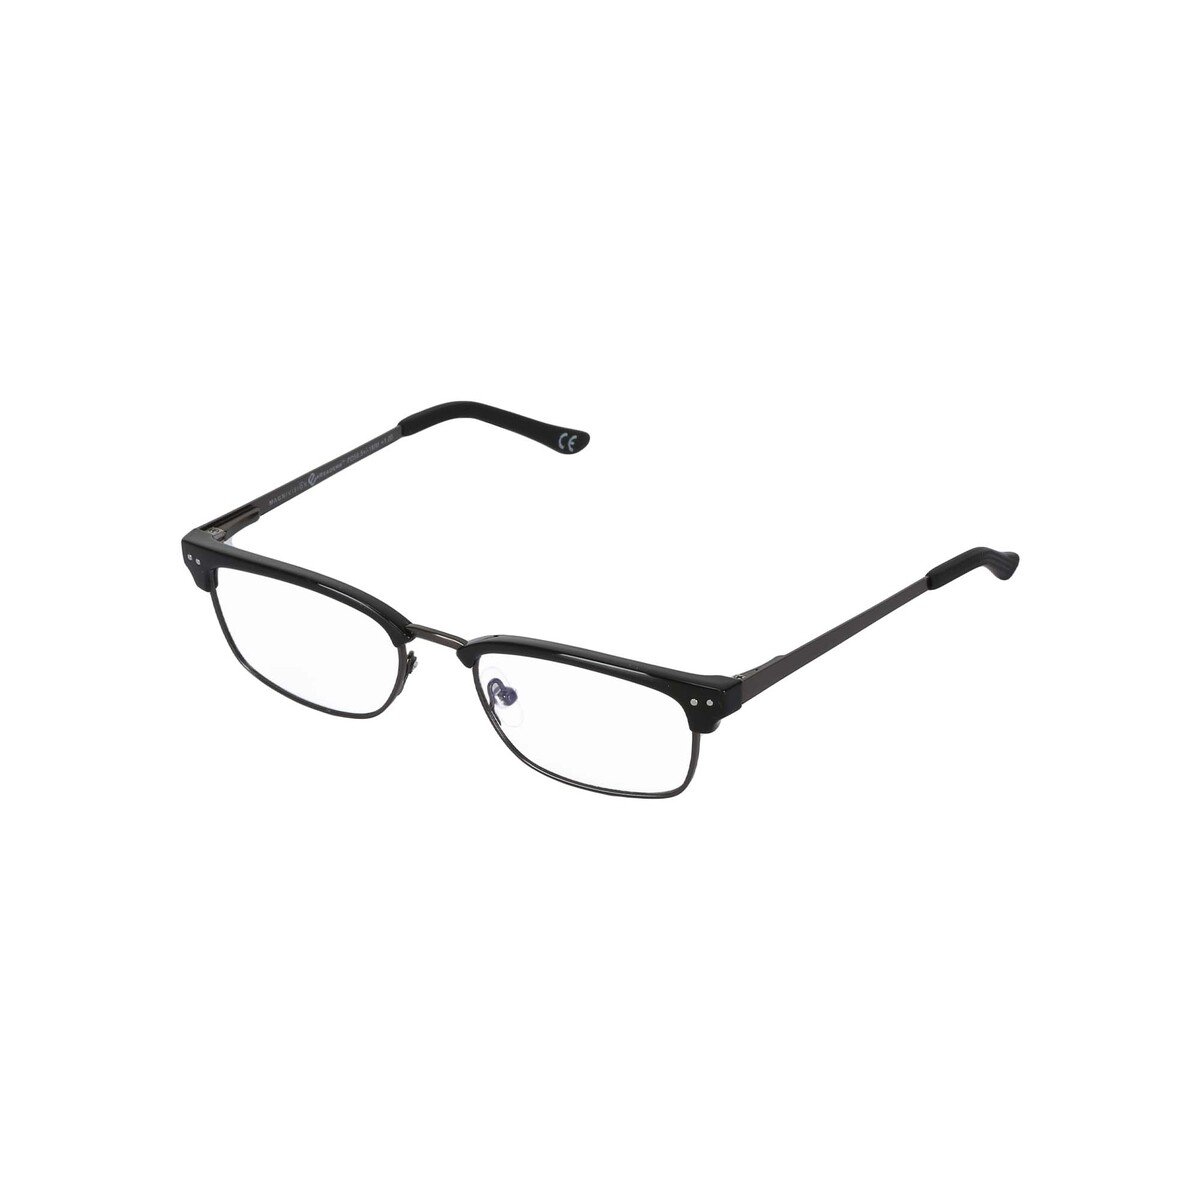 Magnivision Reading Glass WLY114018100 Rectangle Black +1.00